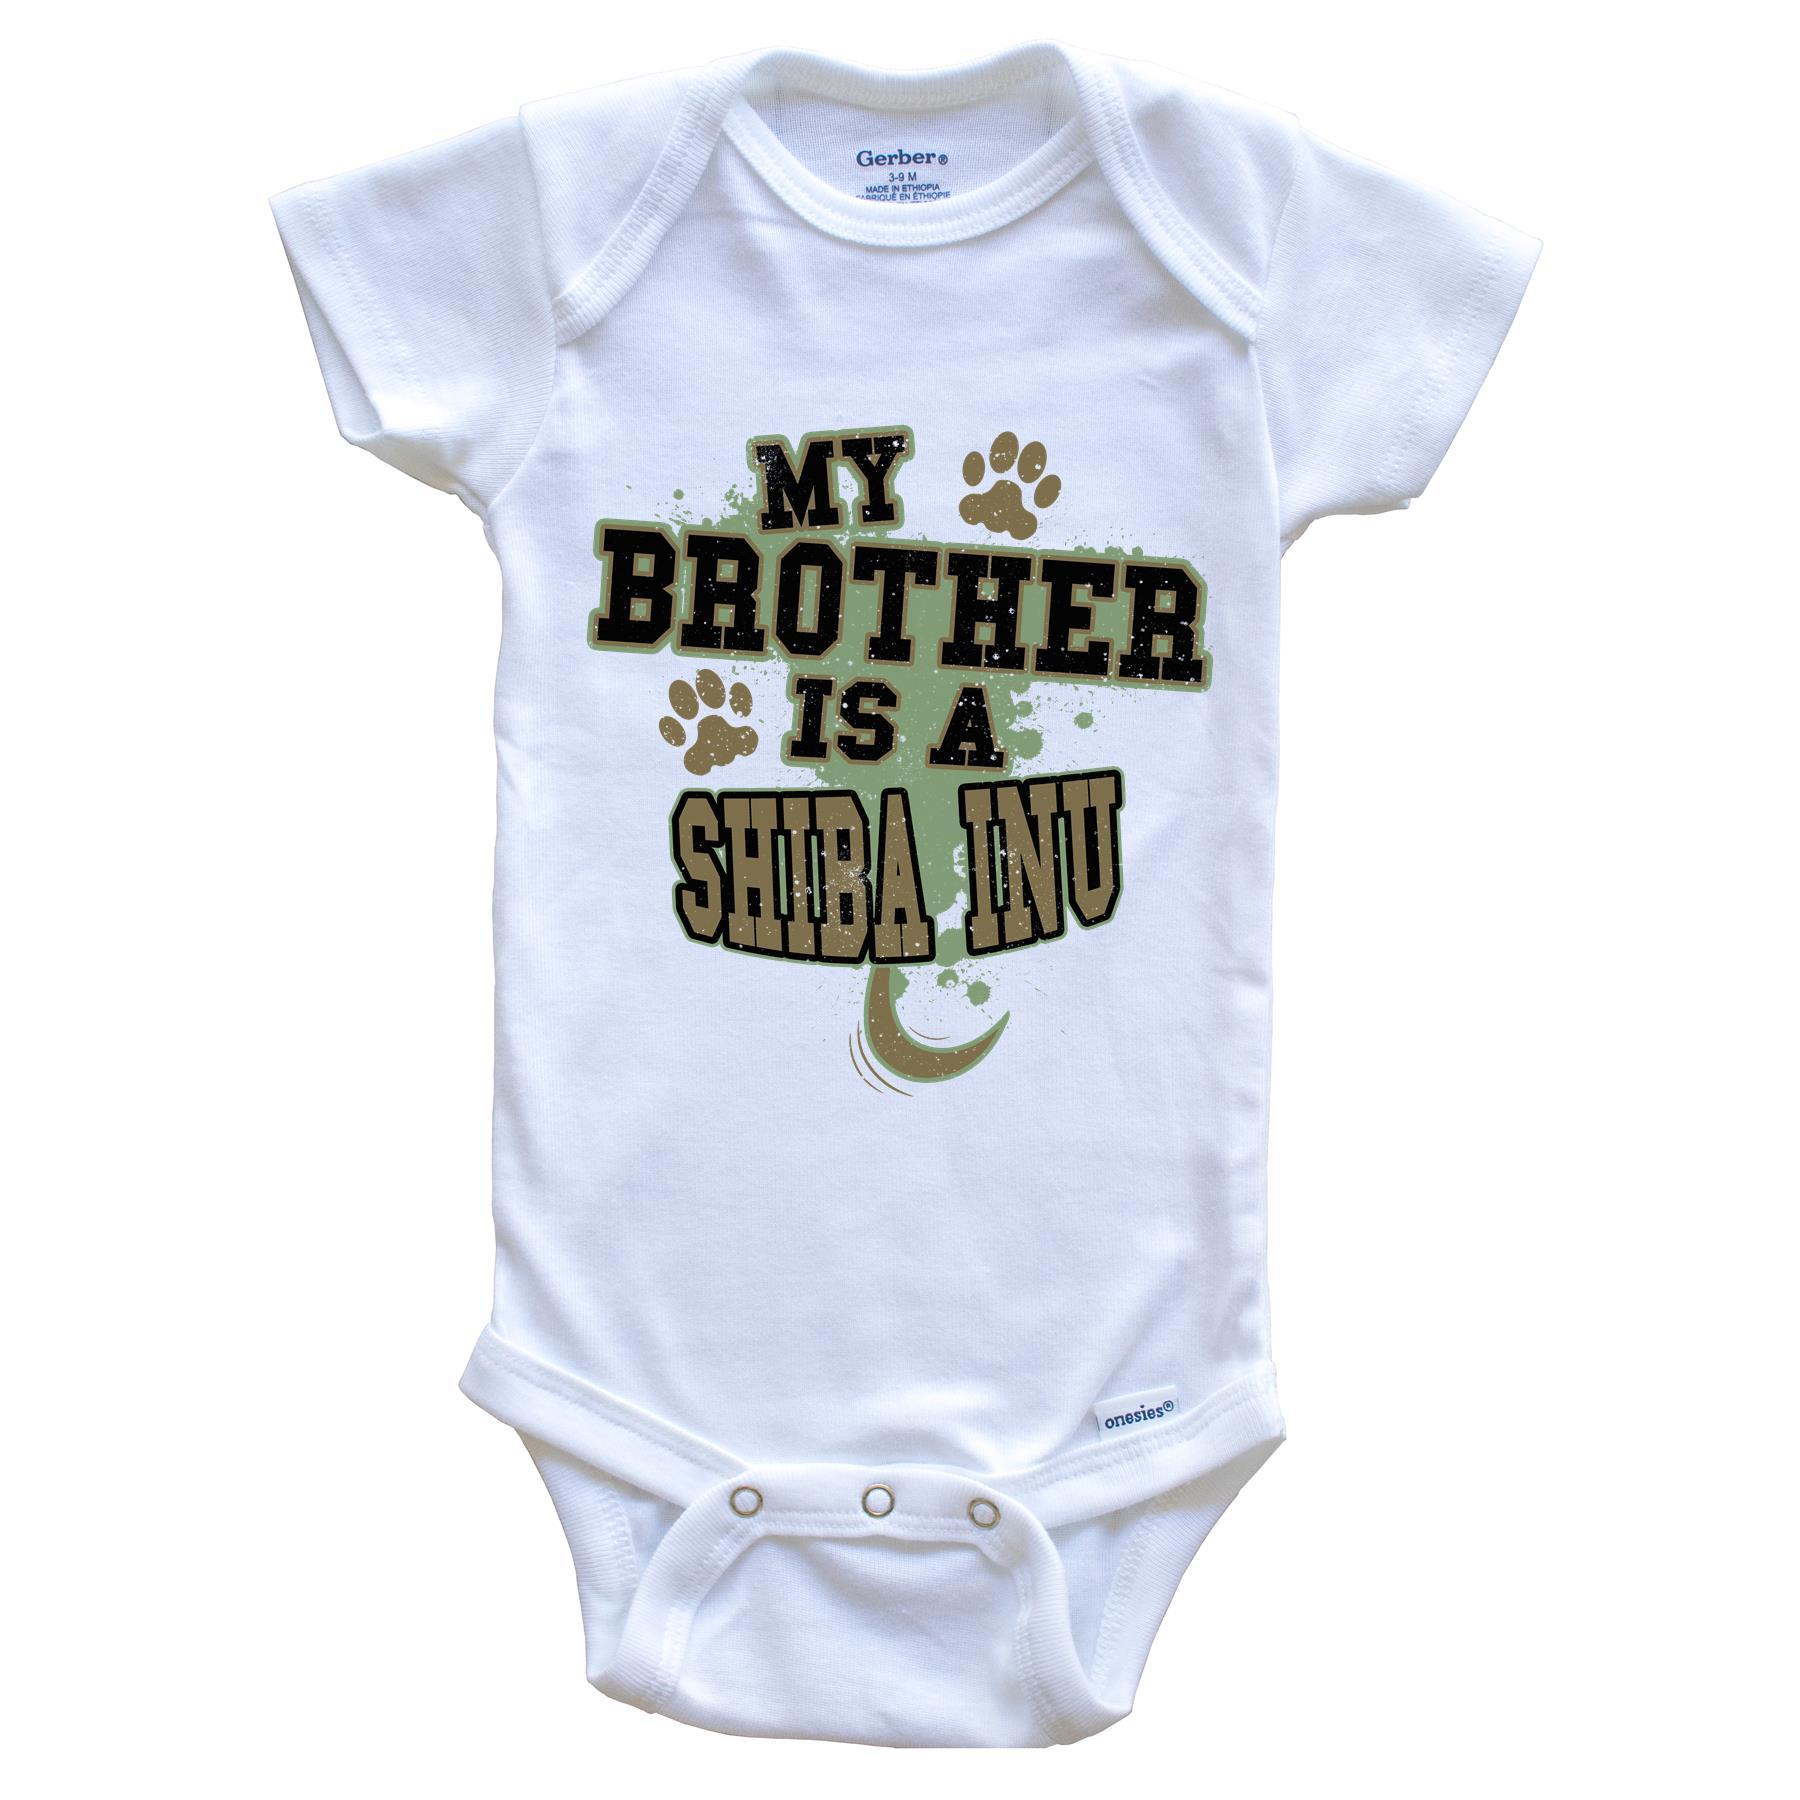 My Brother Is A Shiba Inu Funny Dog Baby Onesie